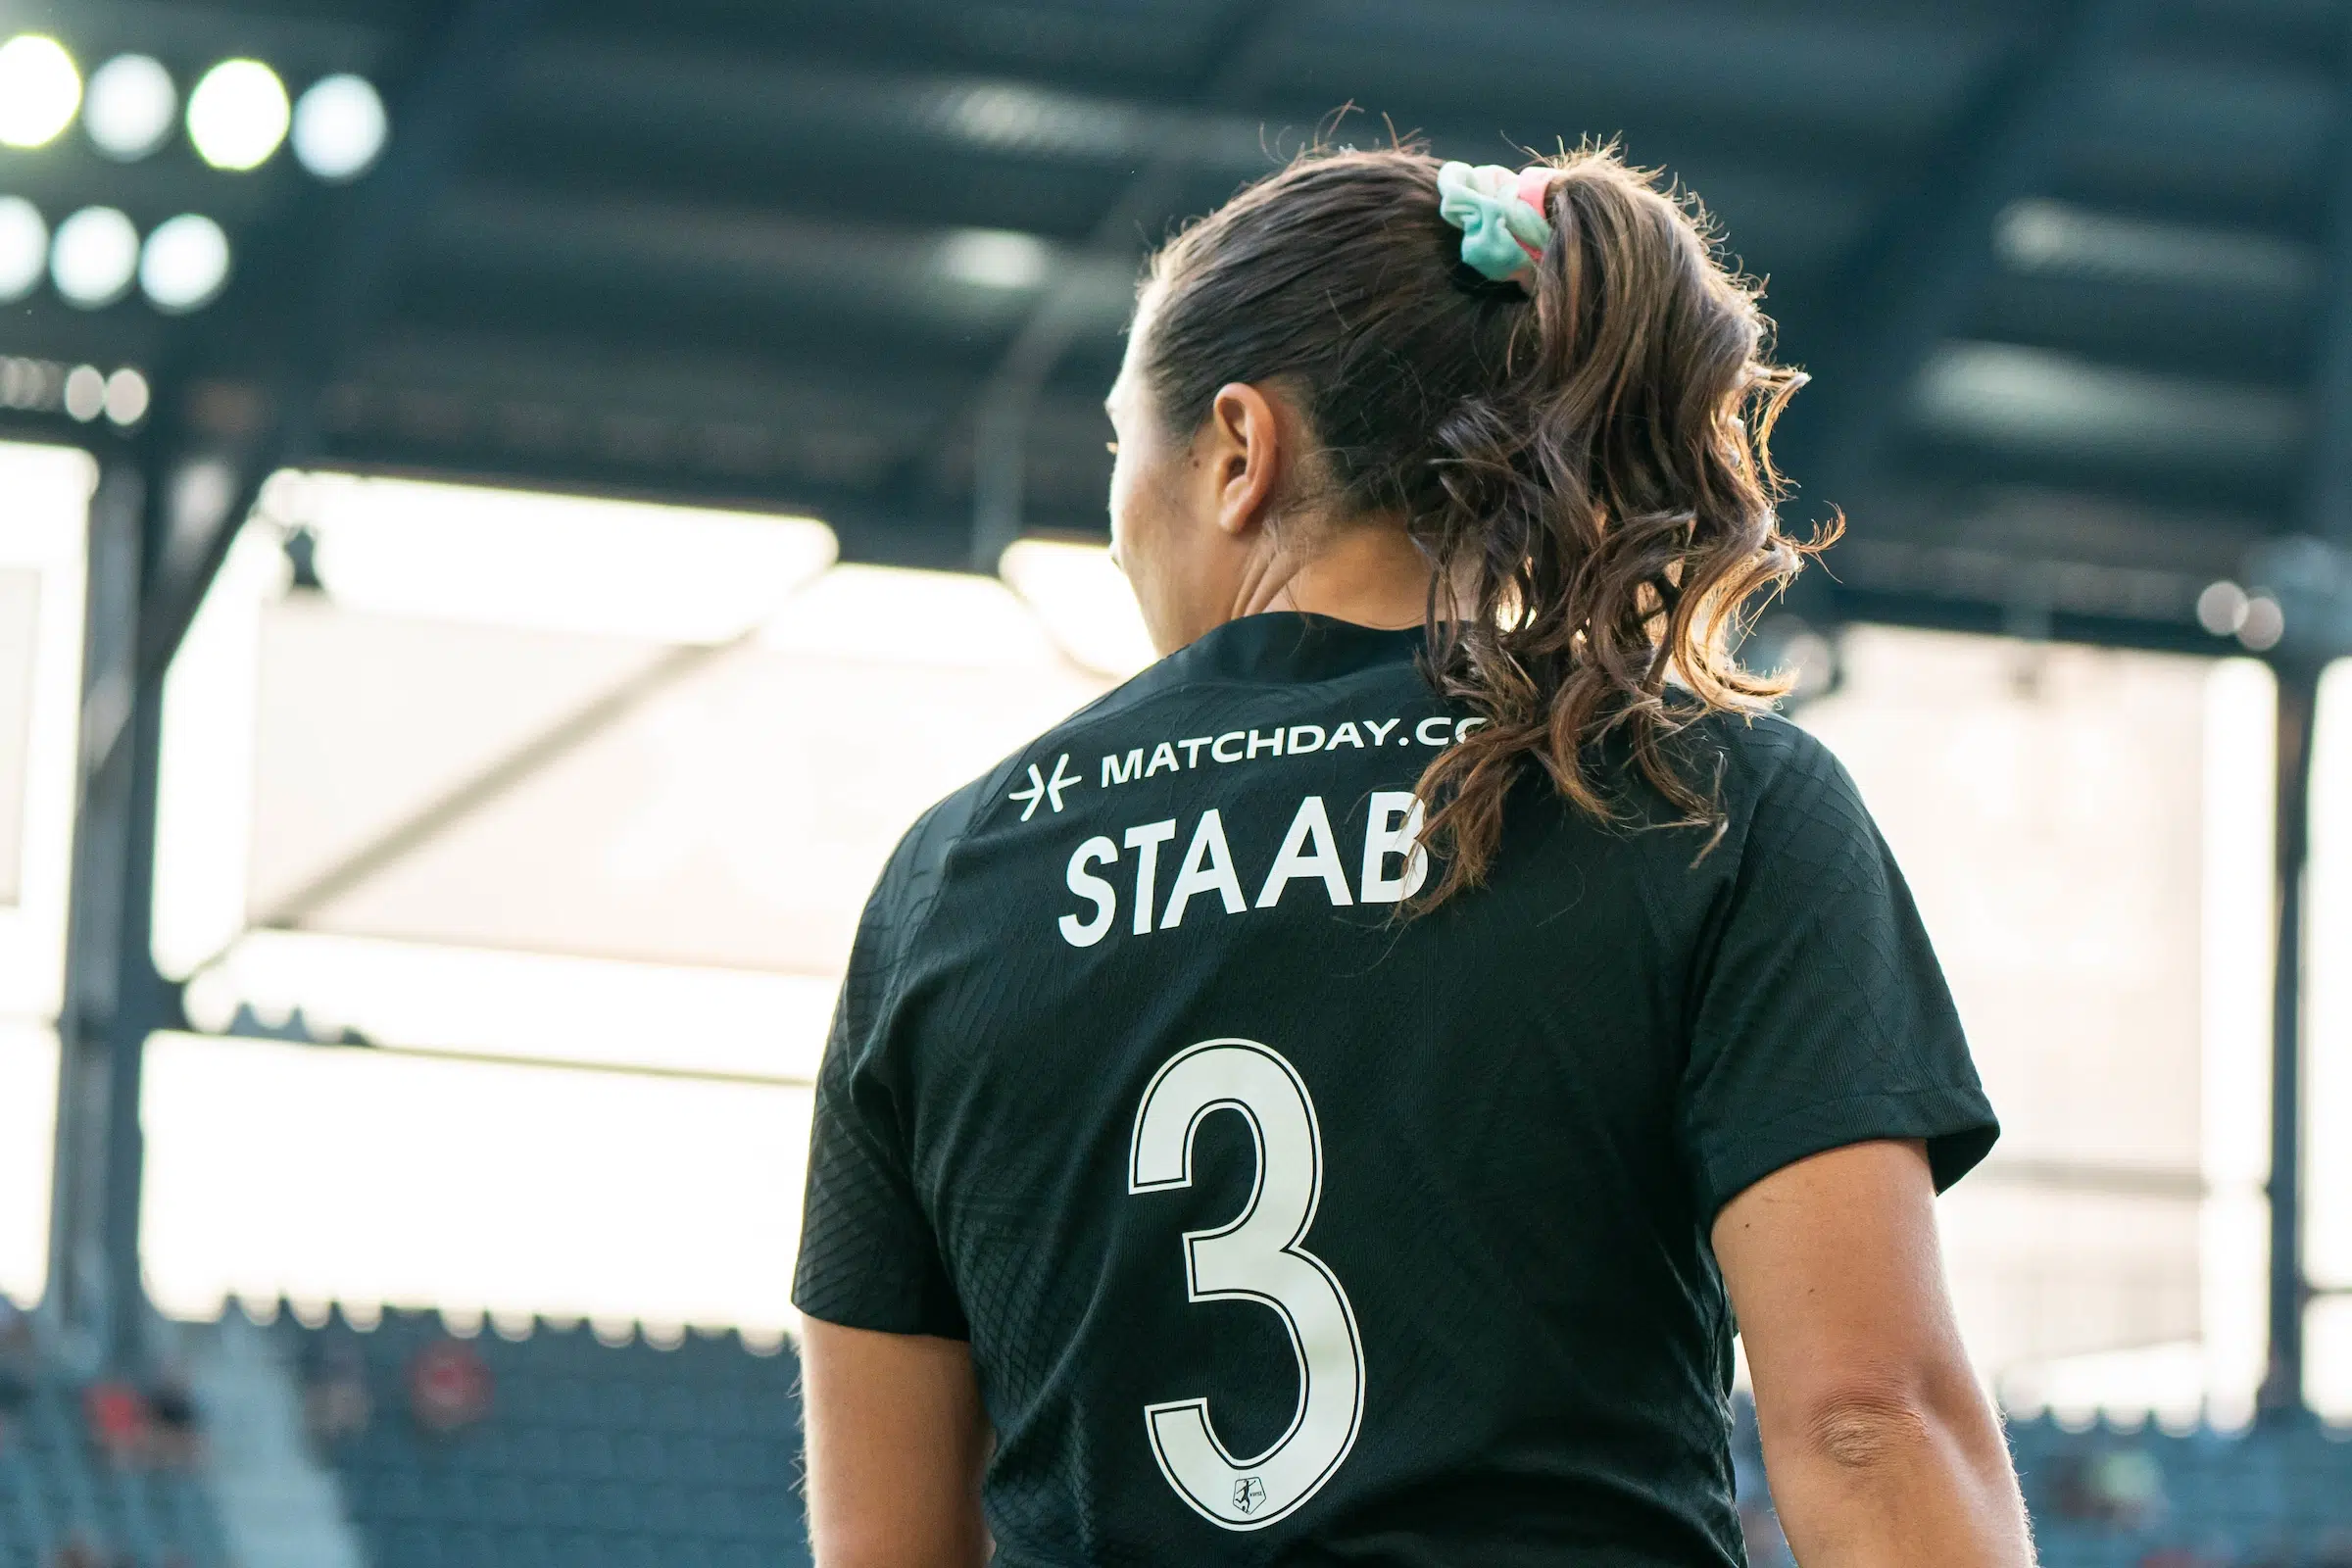 Sam Staab in a black jersey looks off to her left. Her curly ponytail is held up by a multi-colored scrunchie.